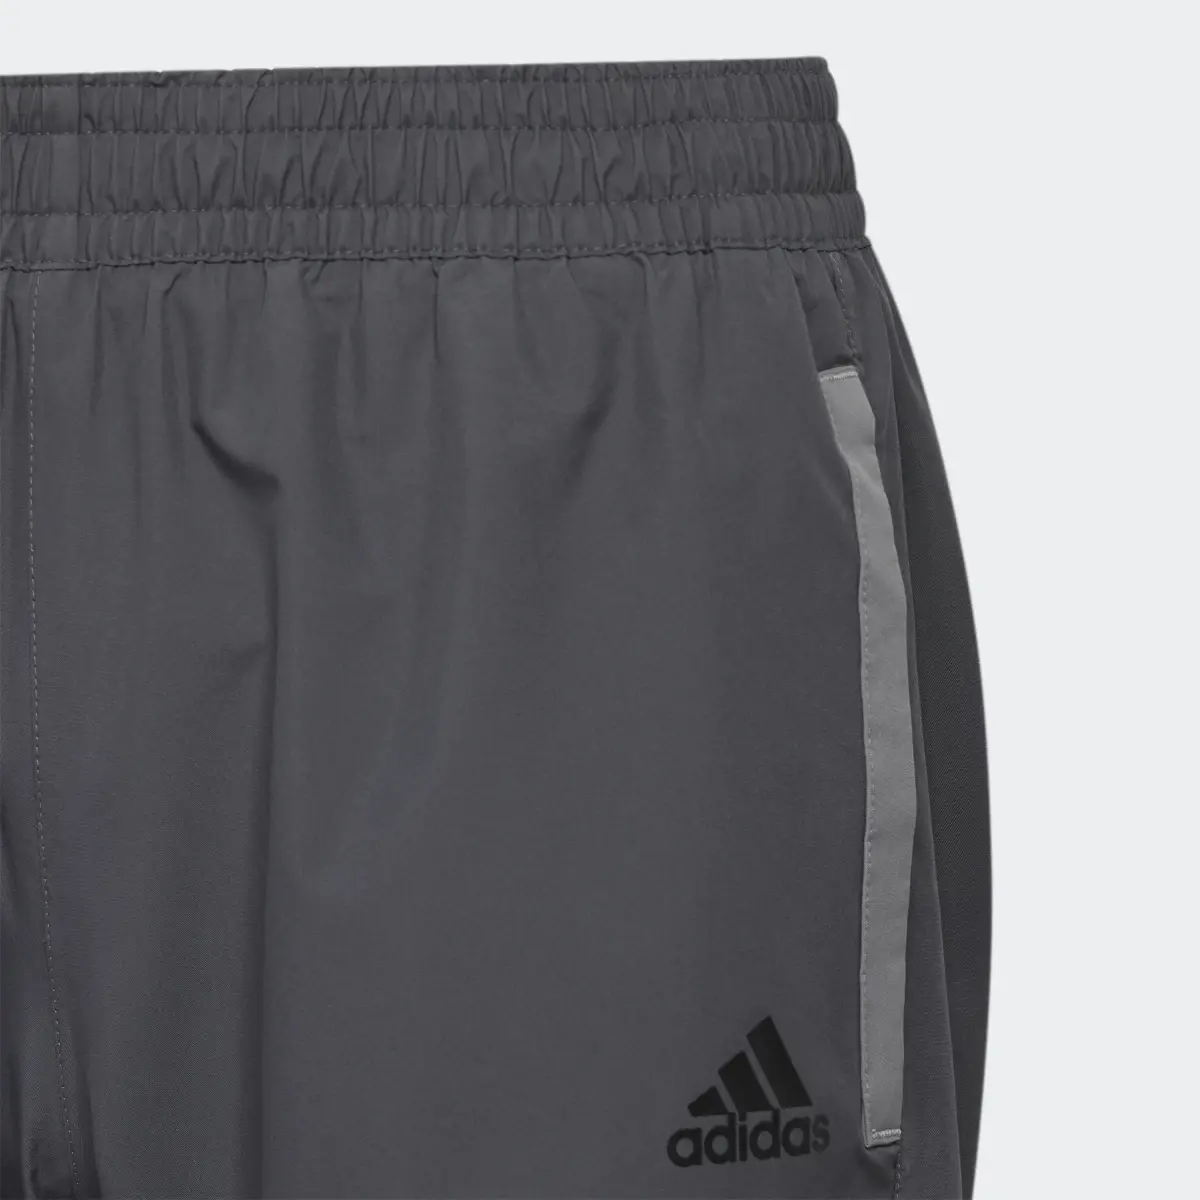 Adidas Provisional Golf Trousers. 3